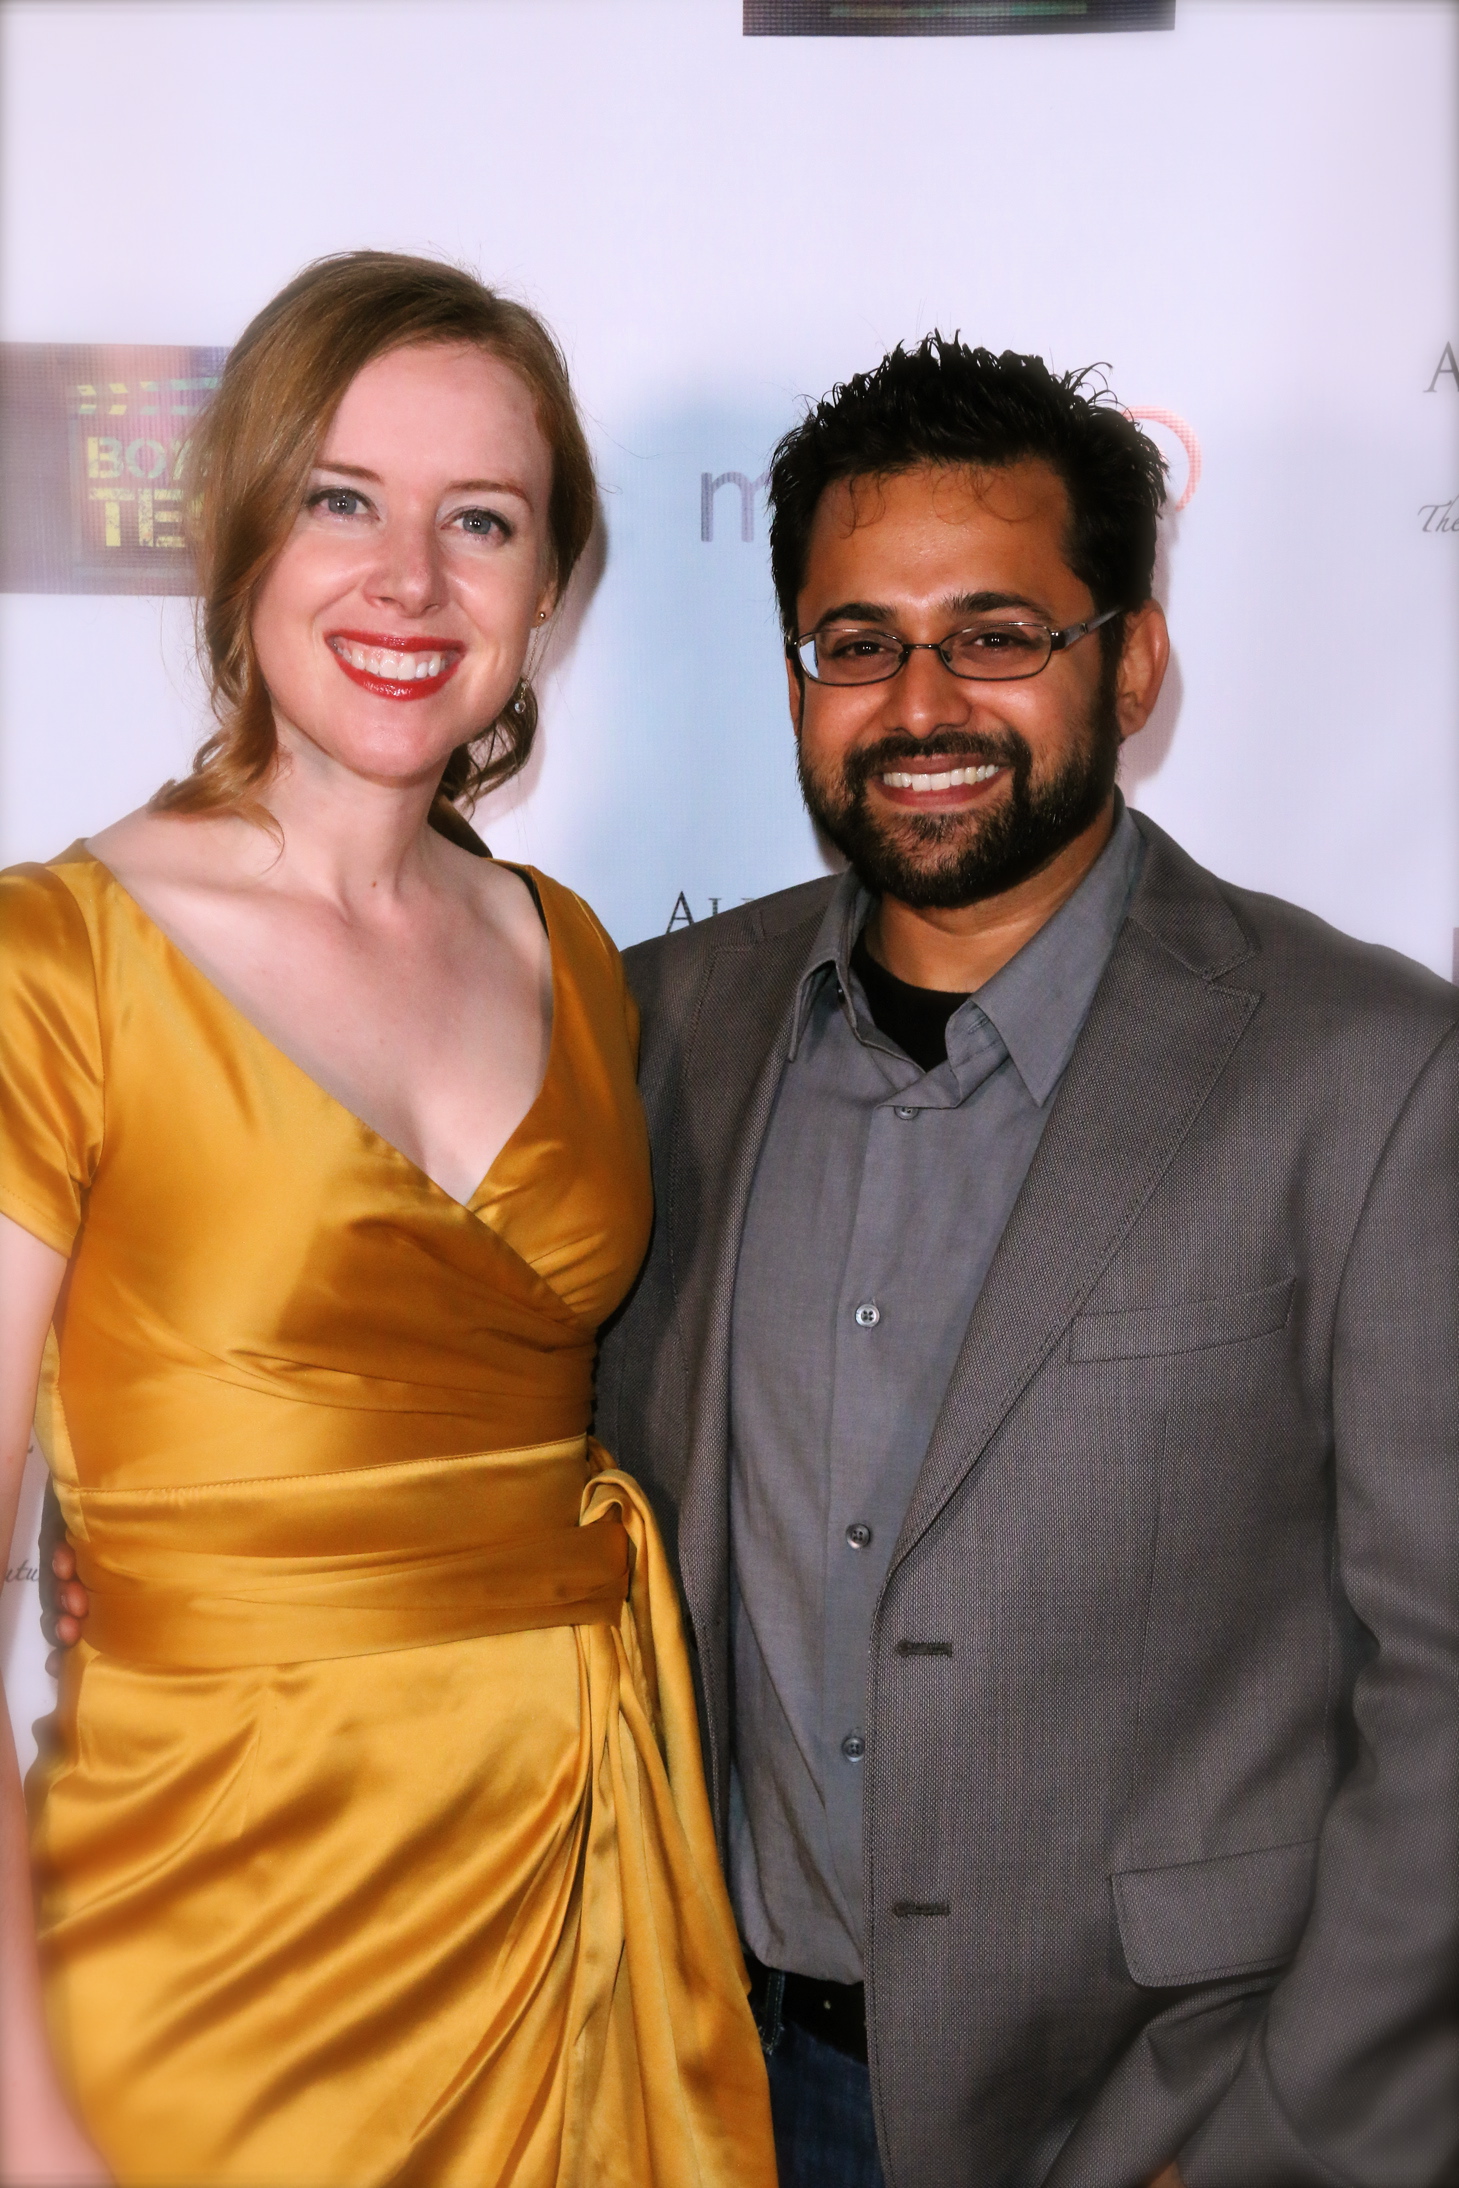 Marion Kerr and director Kevin K. Shah at the opening night of the Hollyshorts Film Festival.